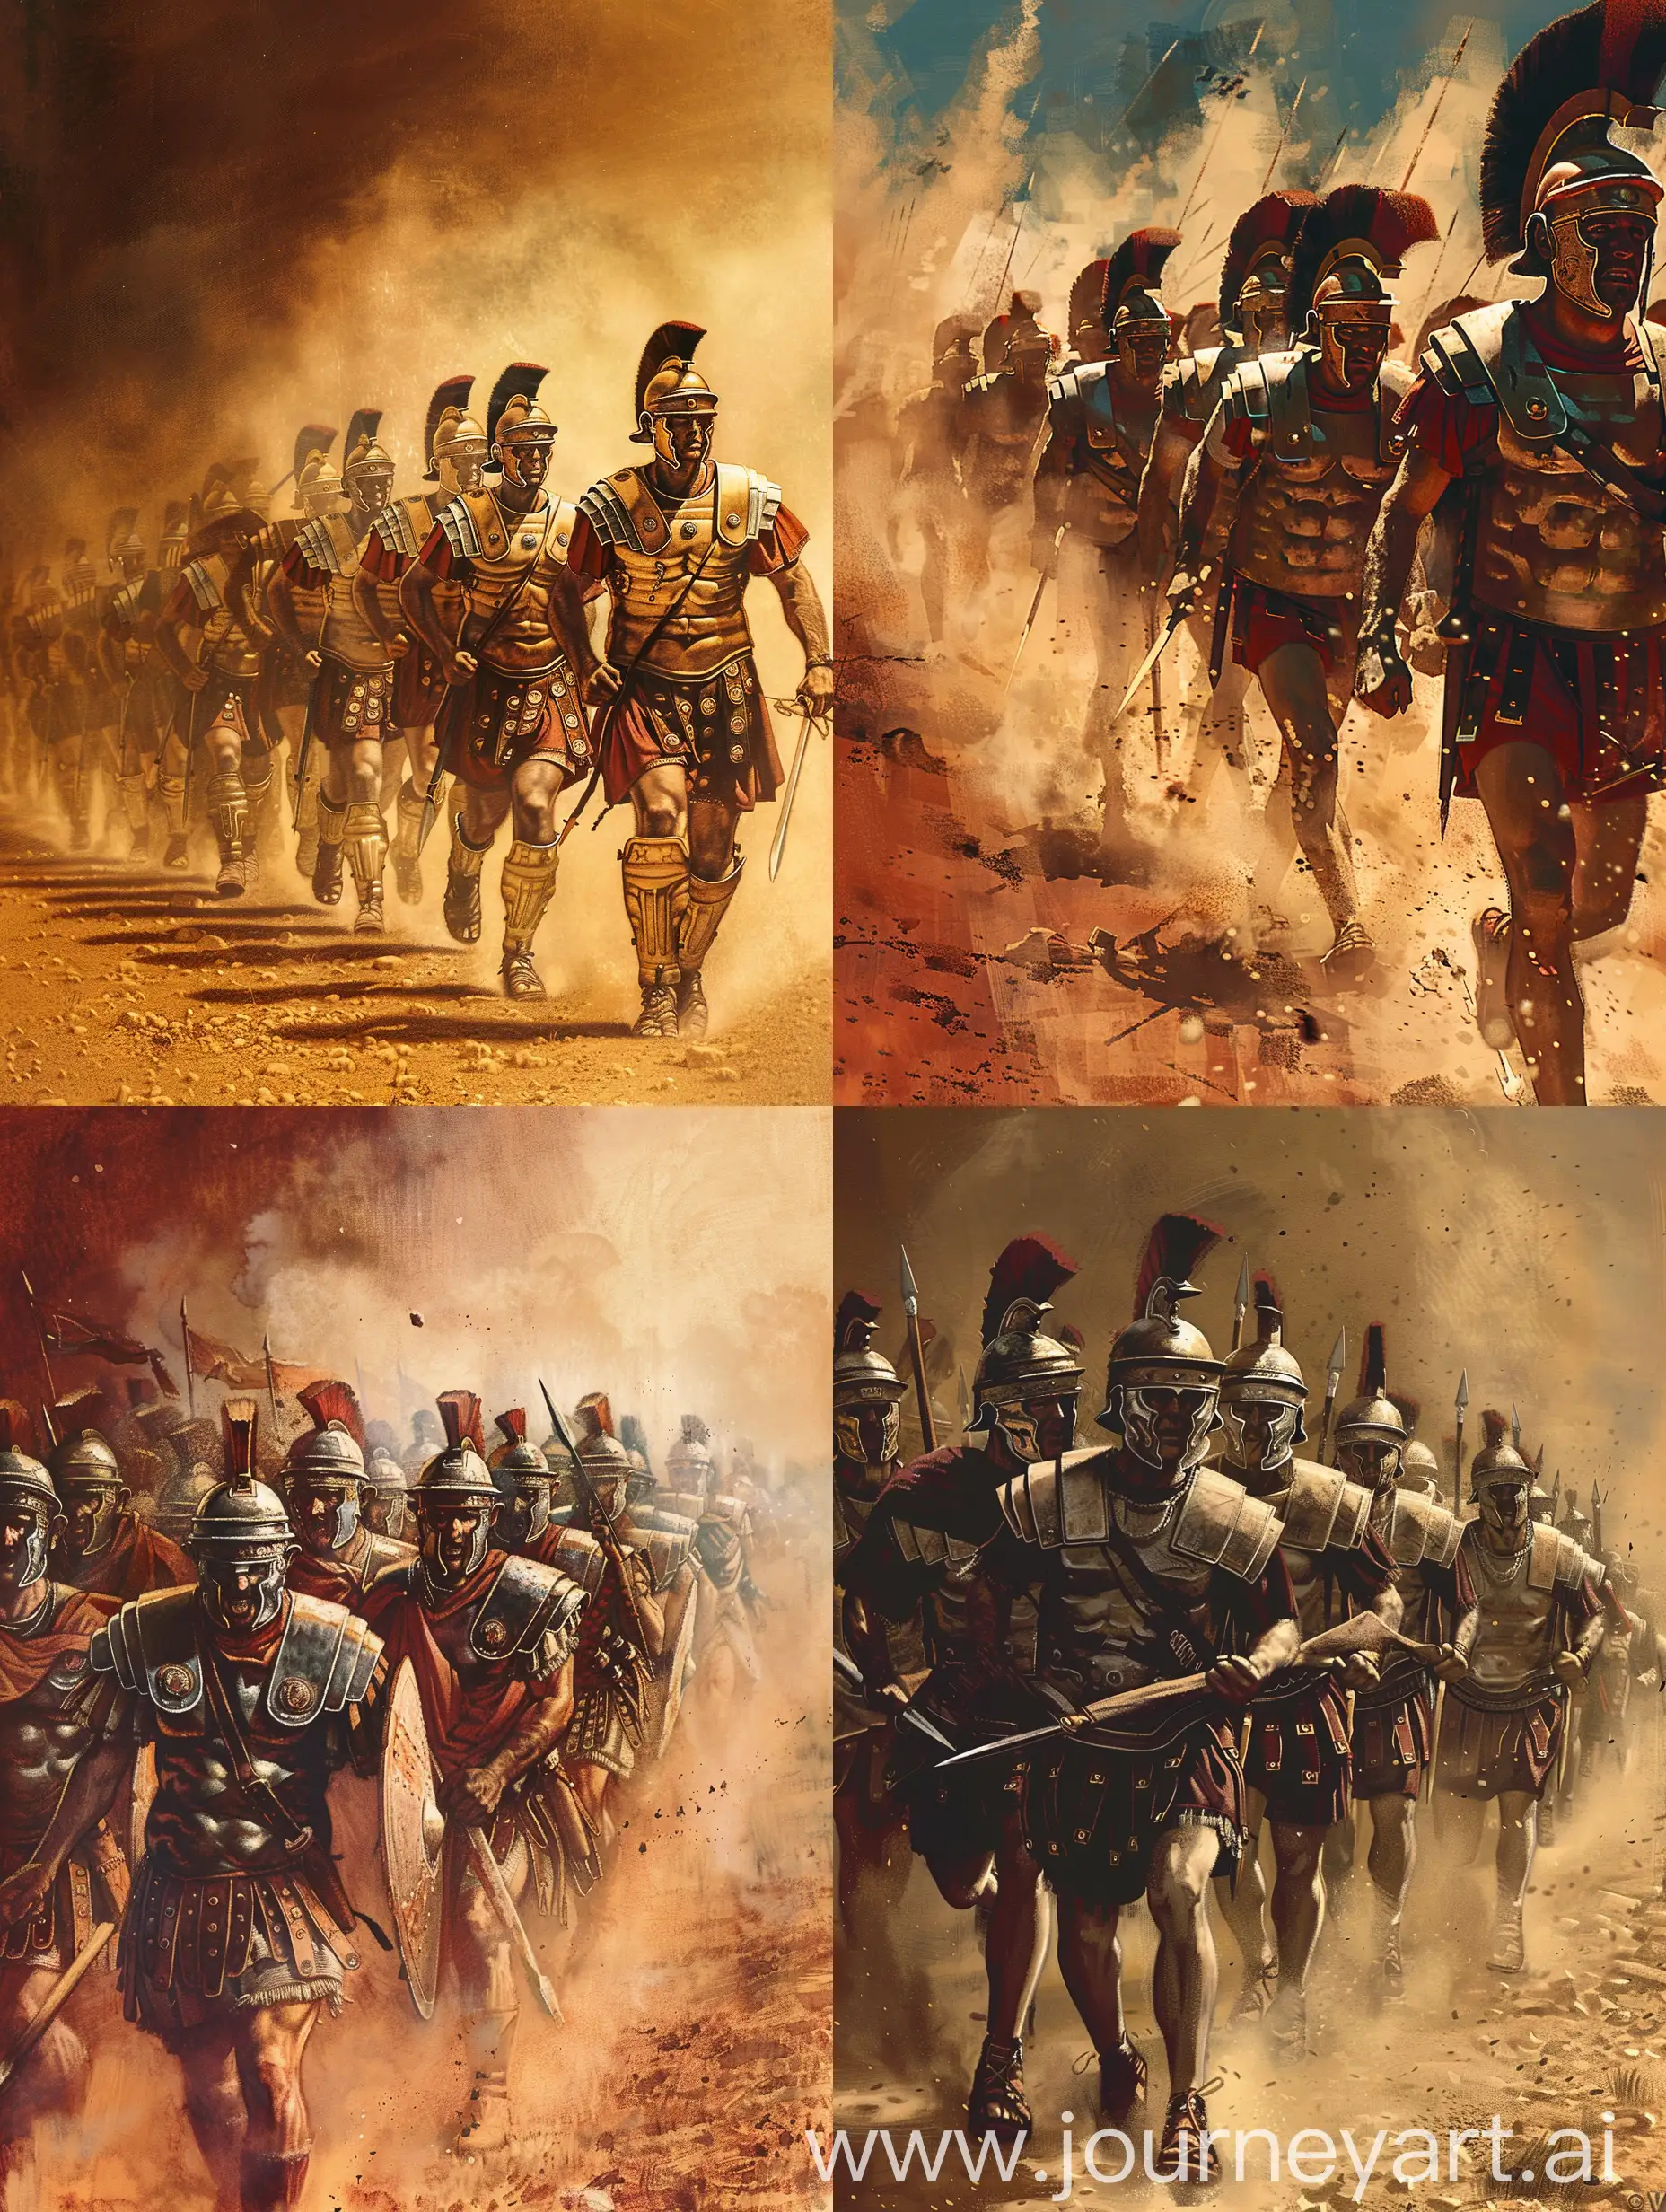 Roman Soldiers marching at battle field, dust, action, illustration by Aaron Horkey